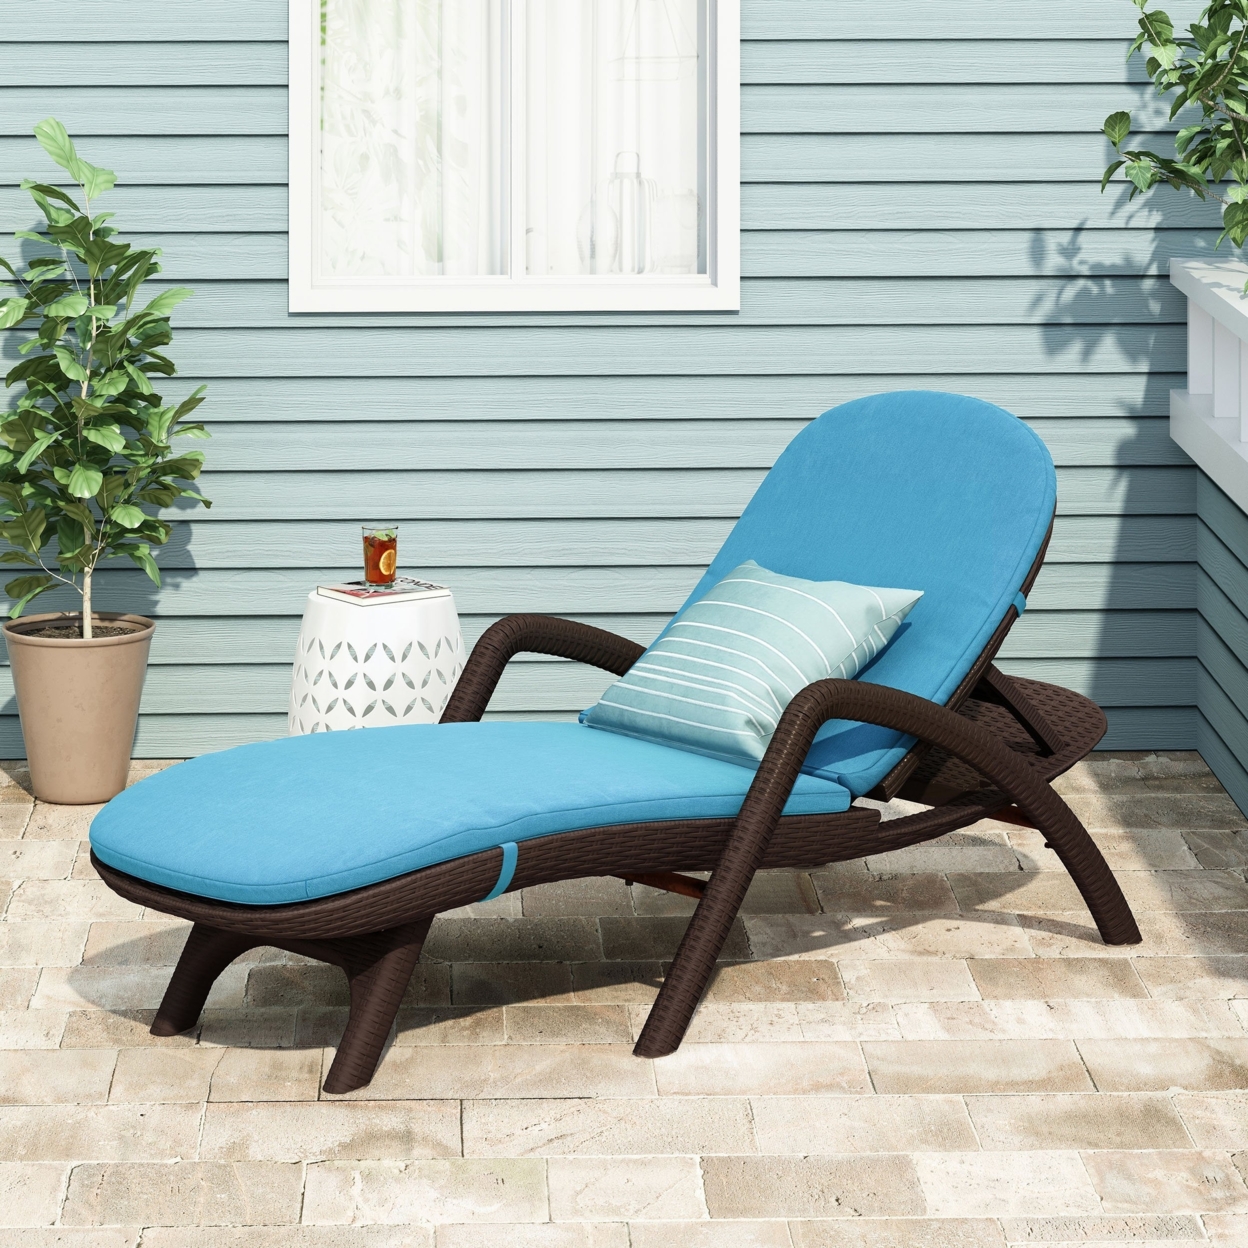 Riley Outdoor Faux Wicker Chaise Lounge With Cushion - Dark Brown/blue